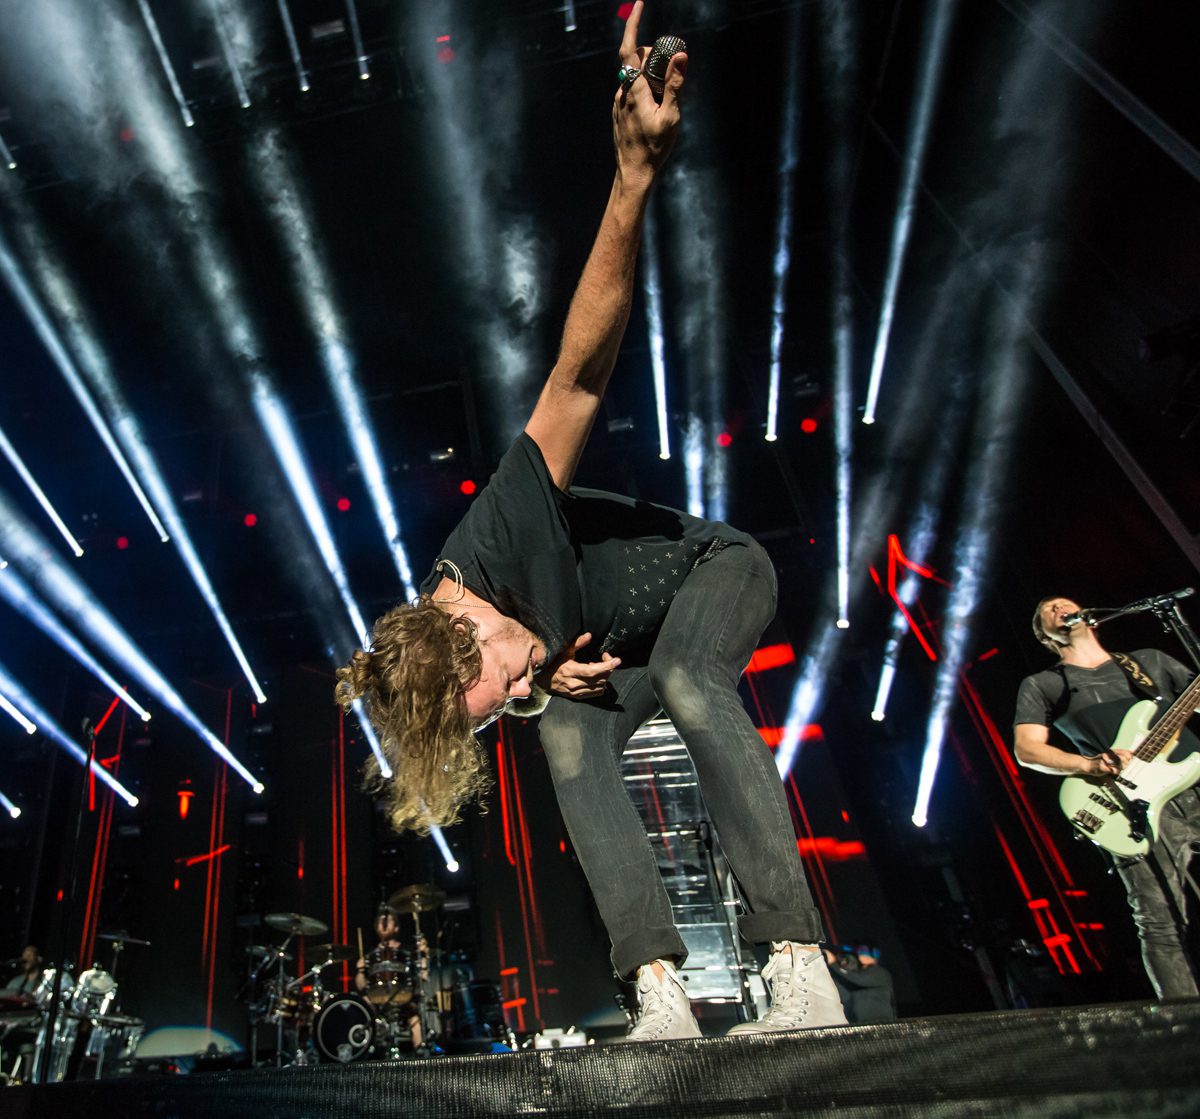 Dan Reynolds of Imagine Dragons at Life is Beautiful 2015 - Day Two